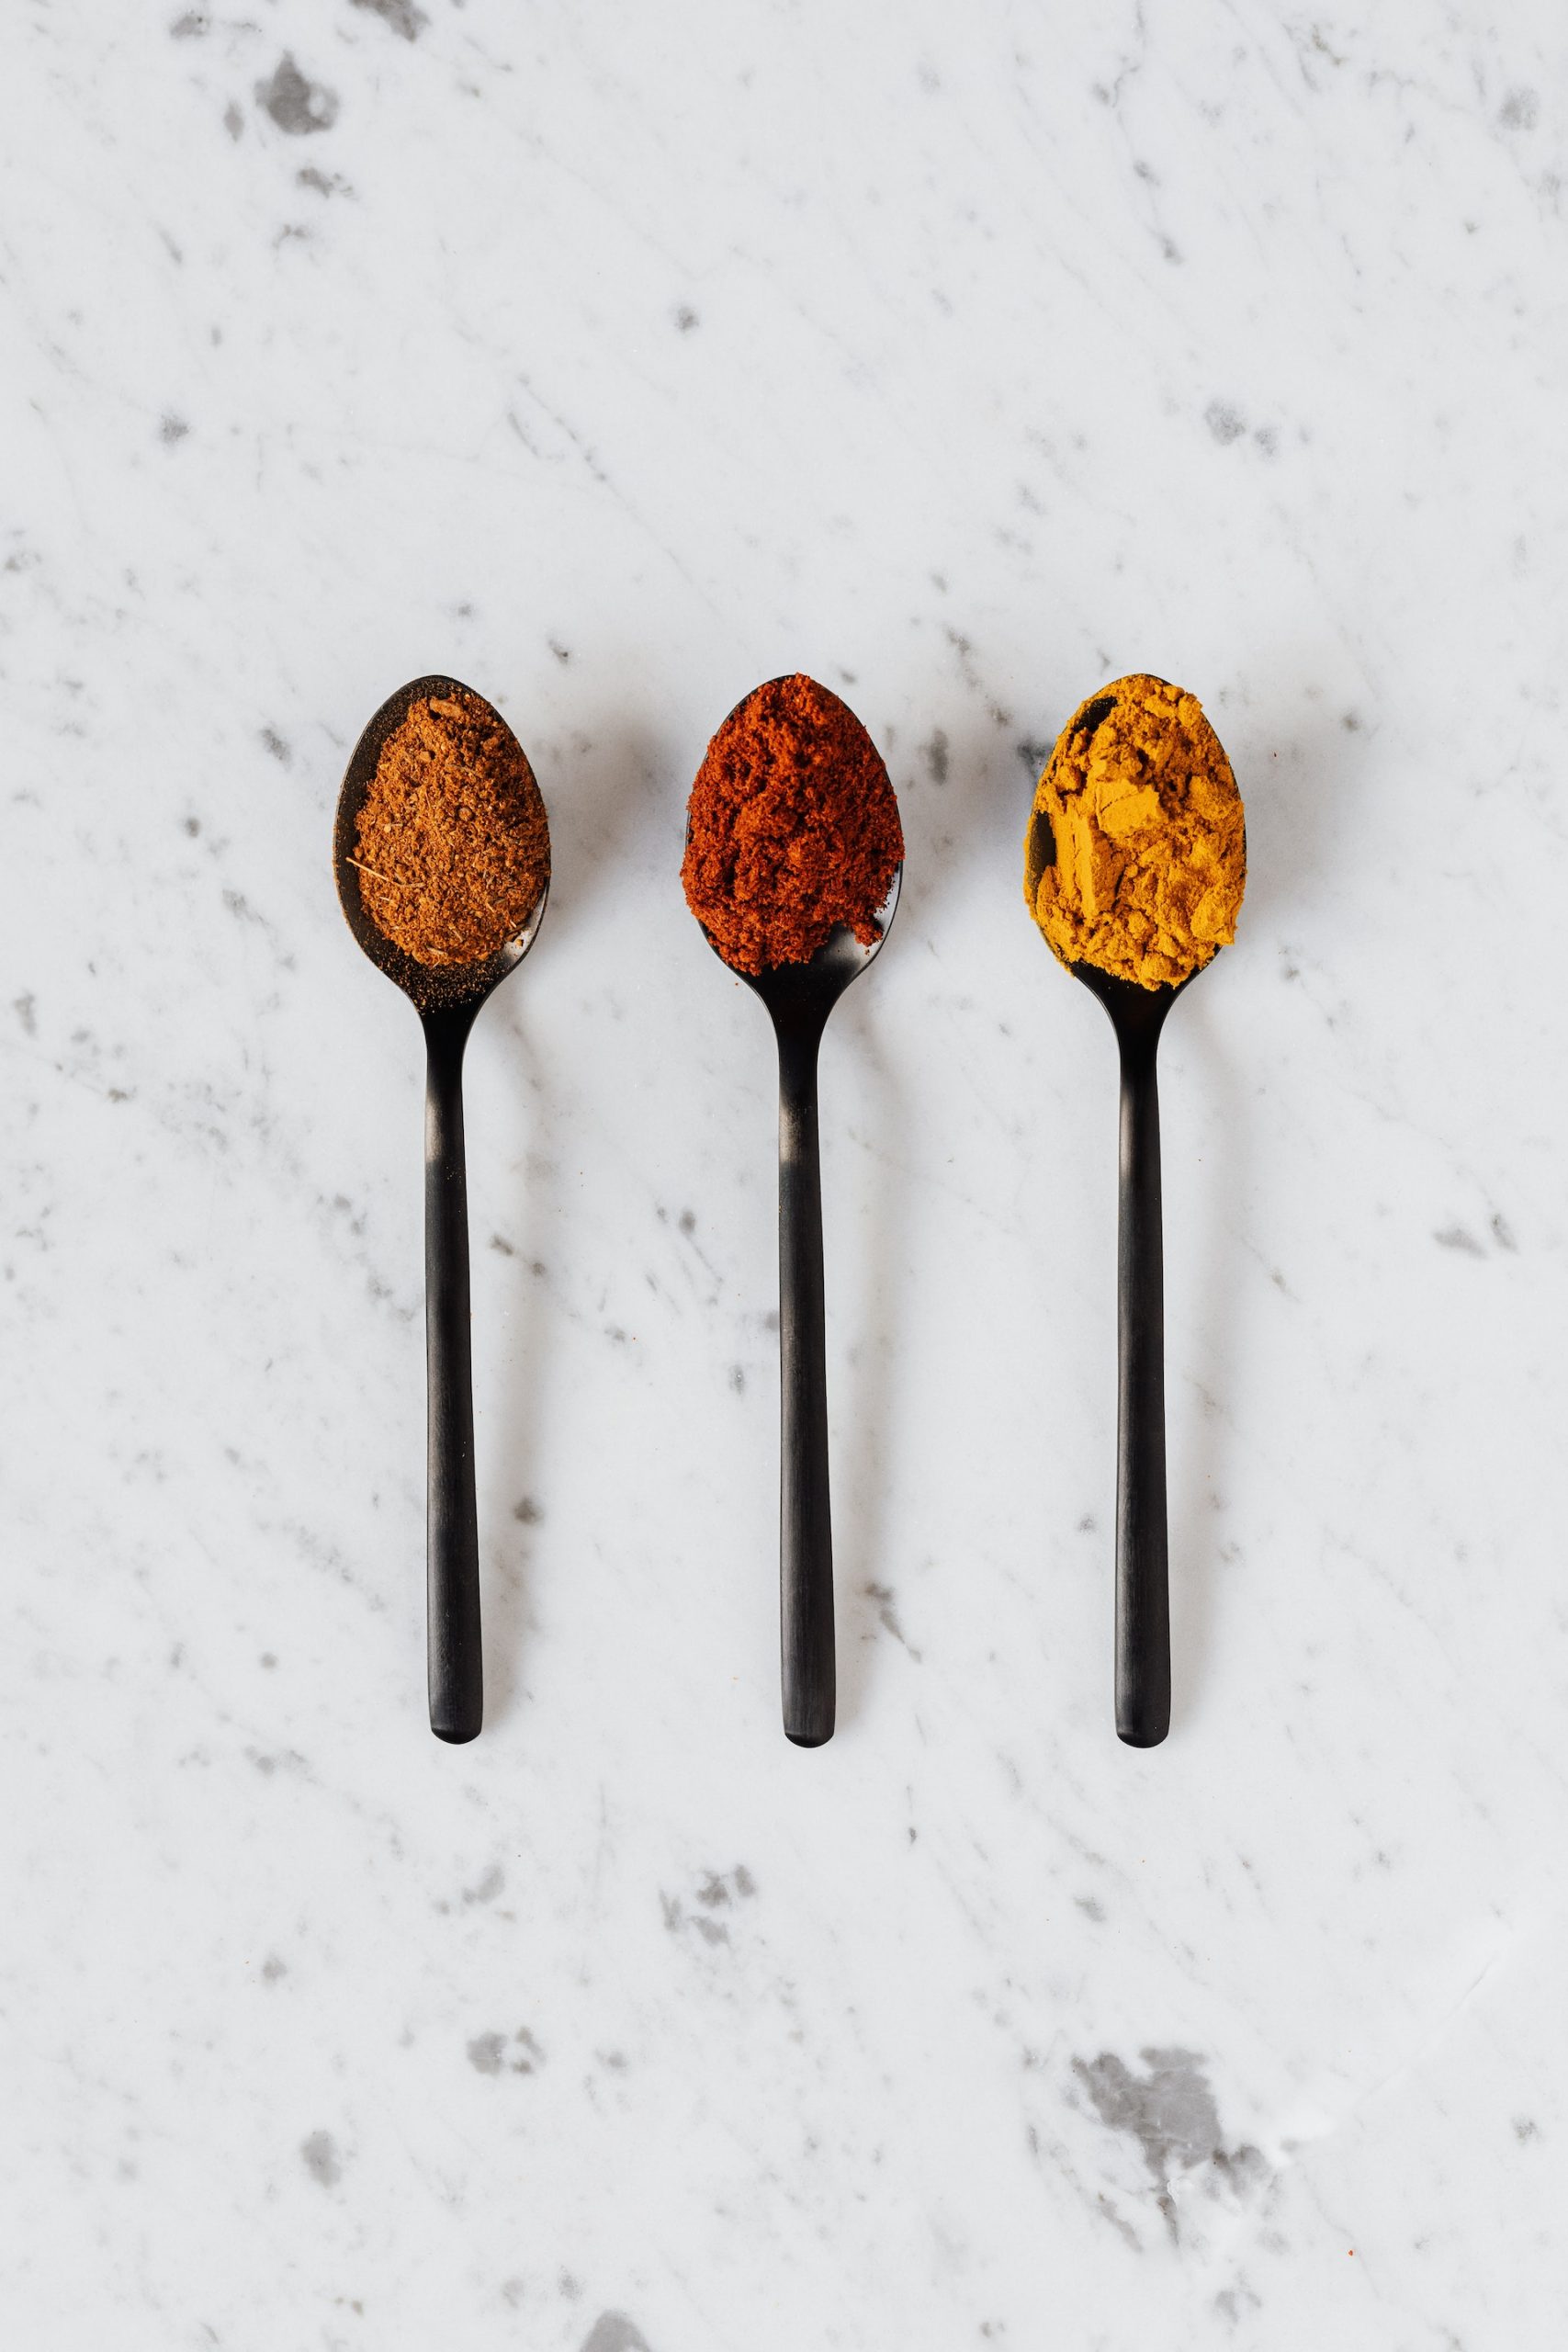 Three spoons with different spices